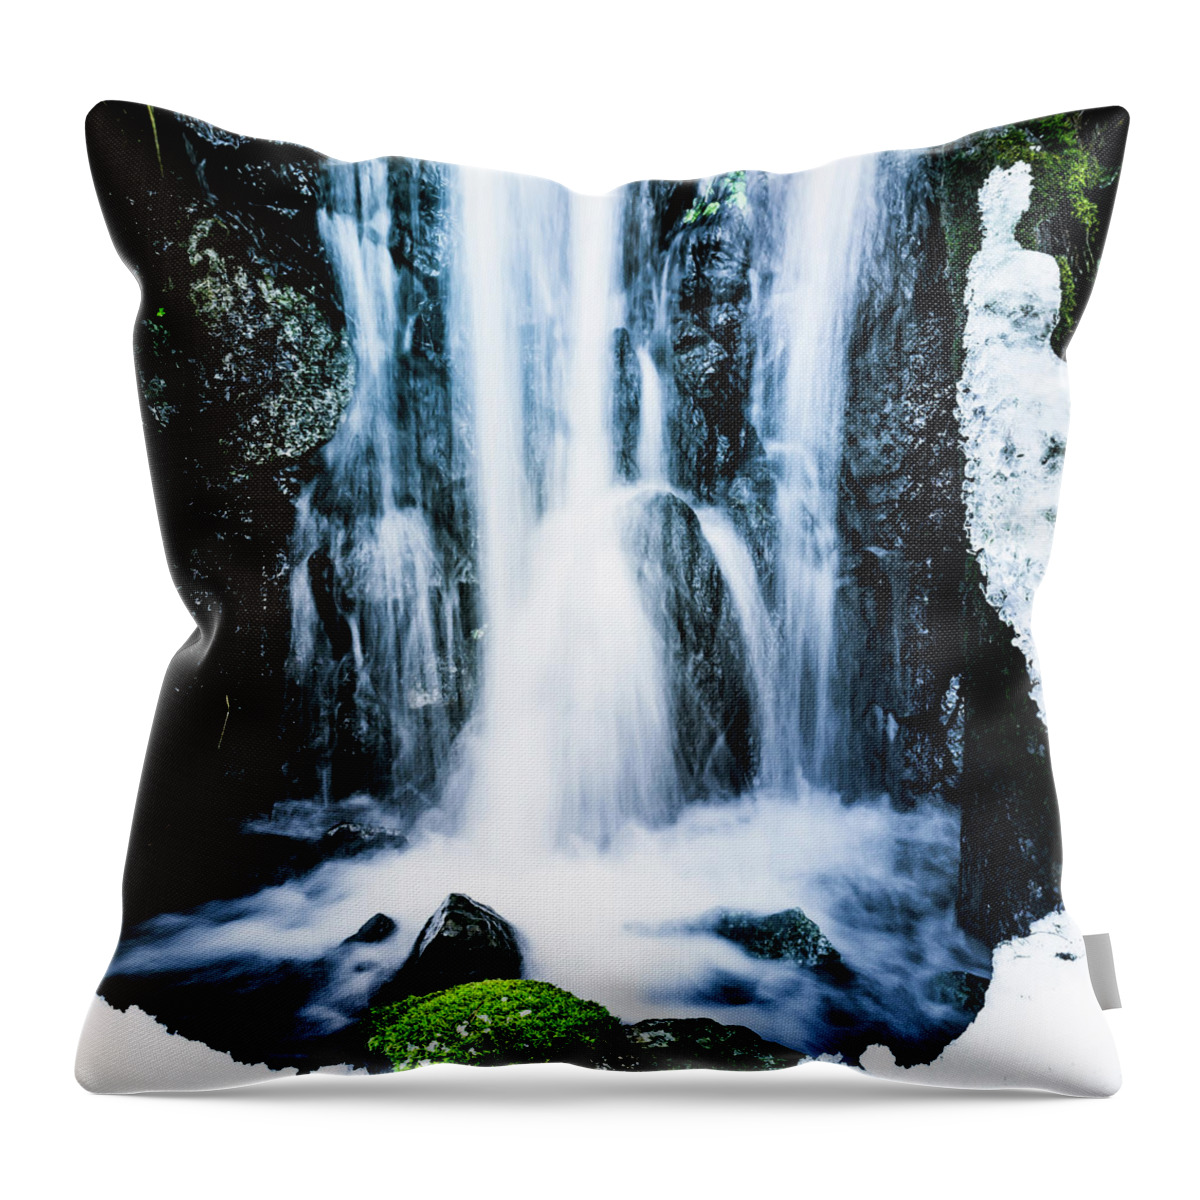 Waterfall Throw Pillow featuring the photograph Early Spring Waterfall by Nicklas Gustafsson